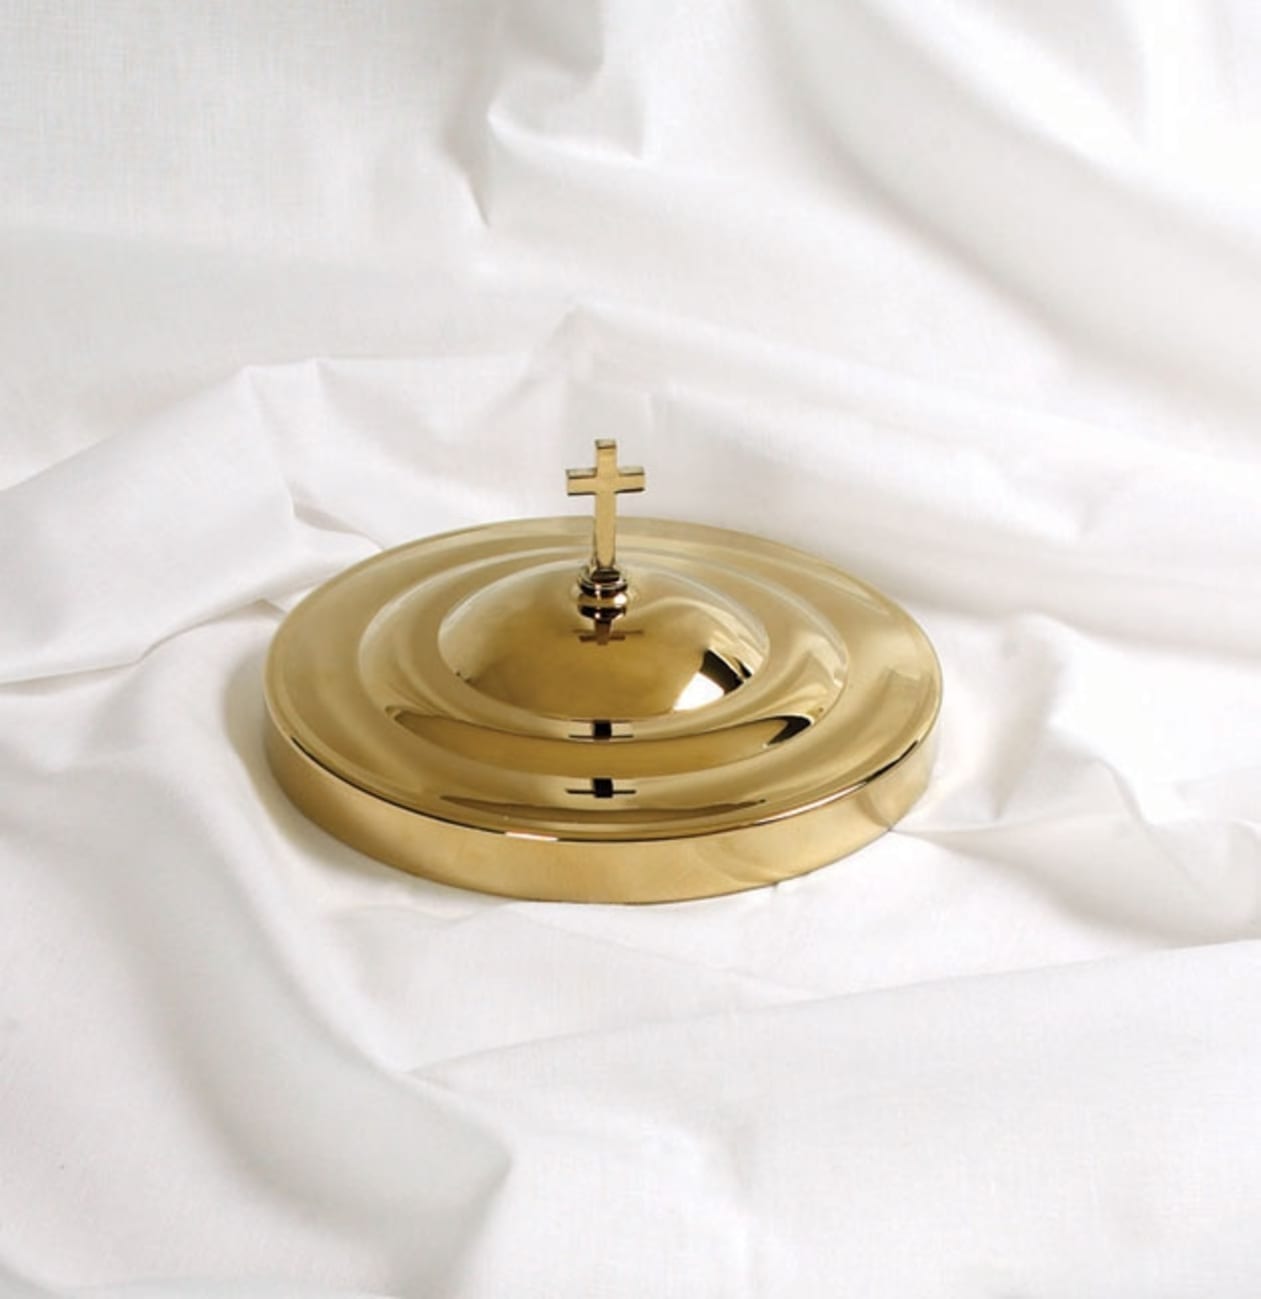 Bread Plate Cover - Goldtone